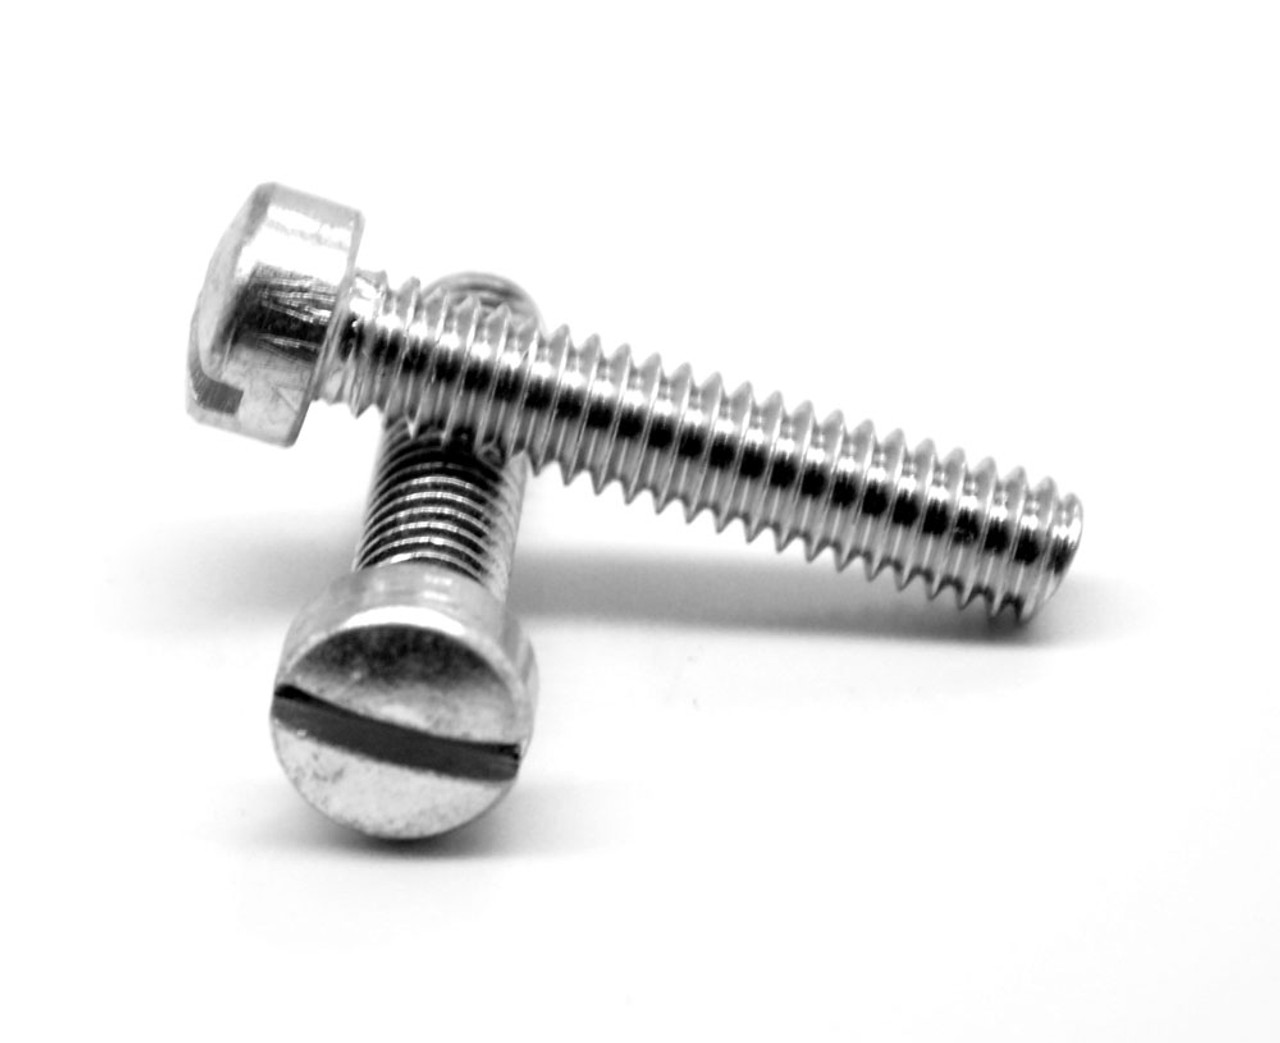 #10-24 x 1/2" (FT) Coarse Thread Machine Screw Slotted Fillister Head Low Carbon Steel Zinc Plated